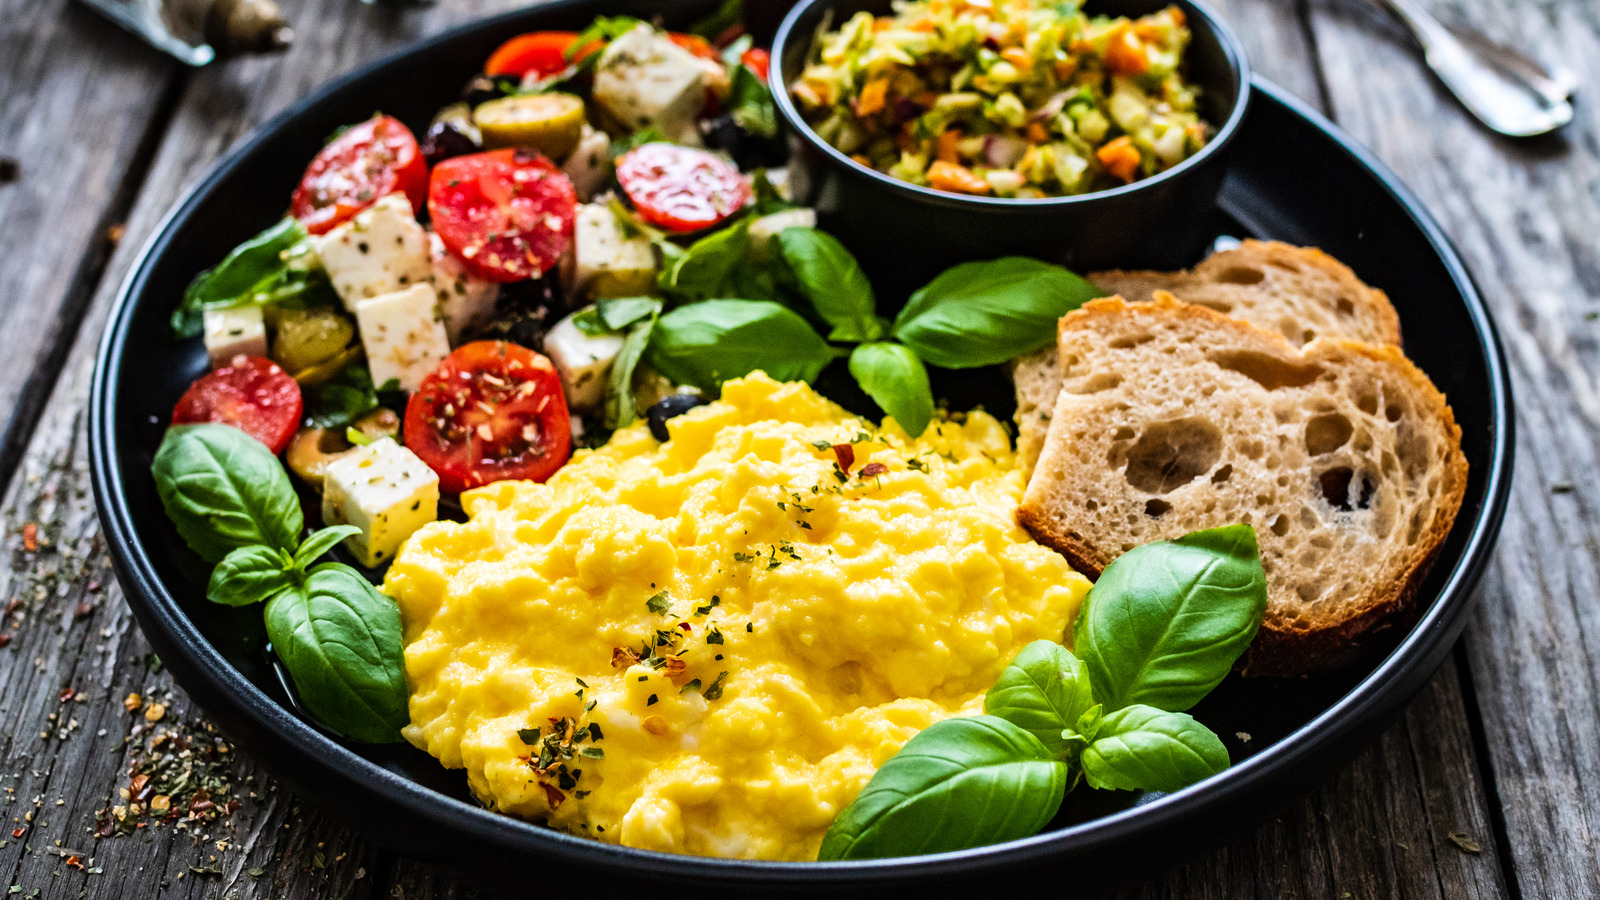 The Best Scrambled Eggs Recipe - NYT Cooking